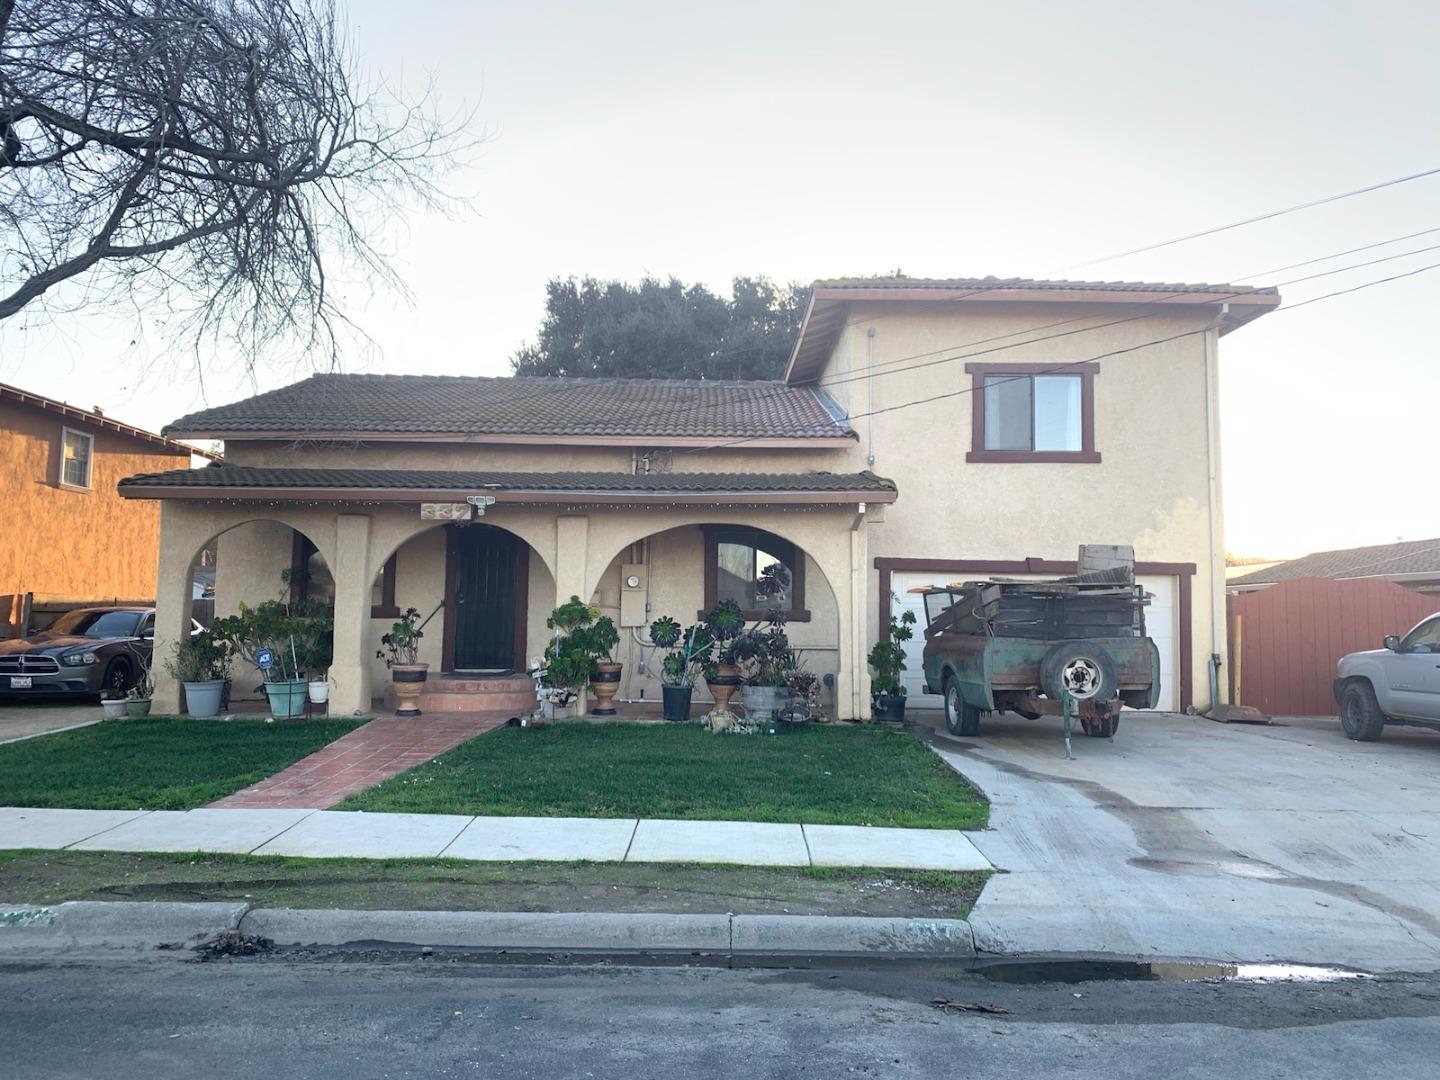 Photo of 337 6th St in Greenfield, CA